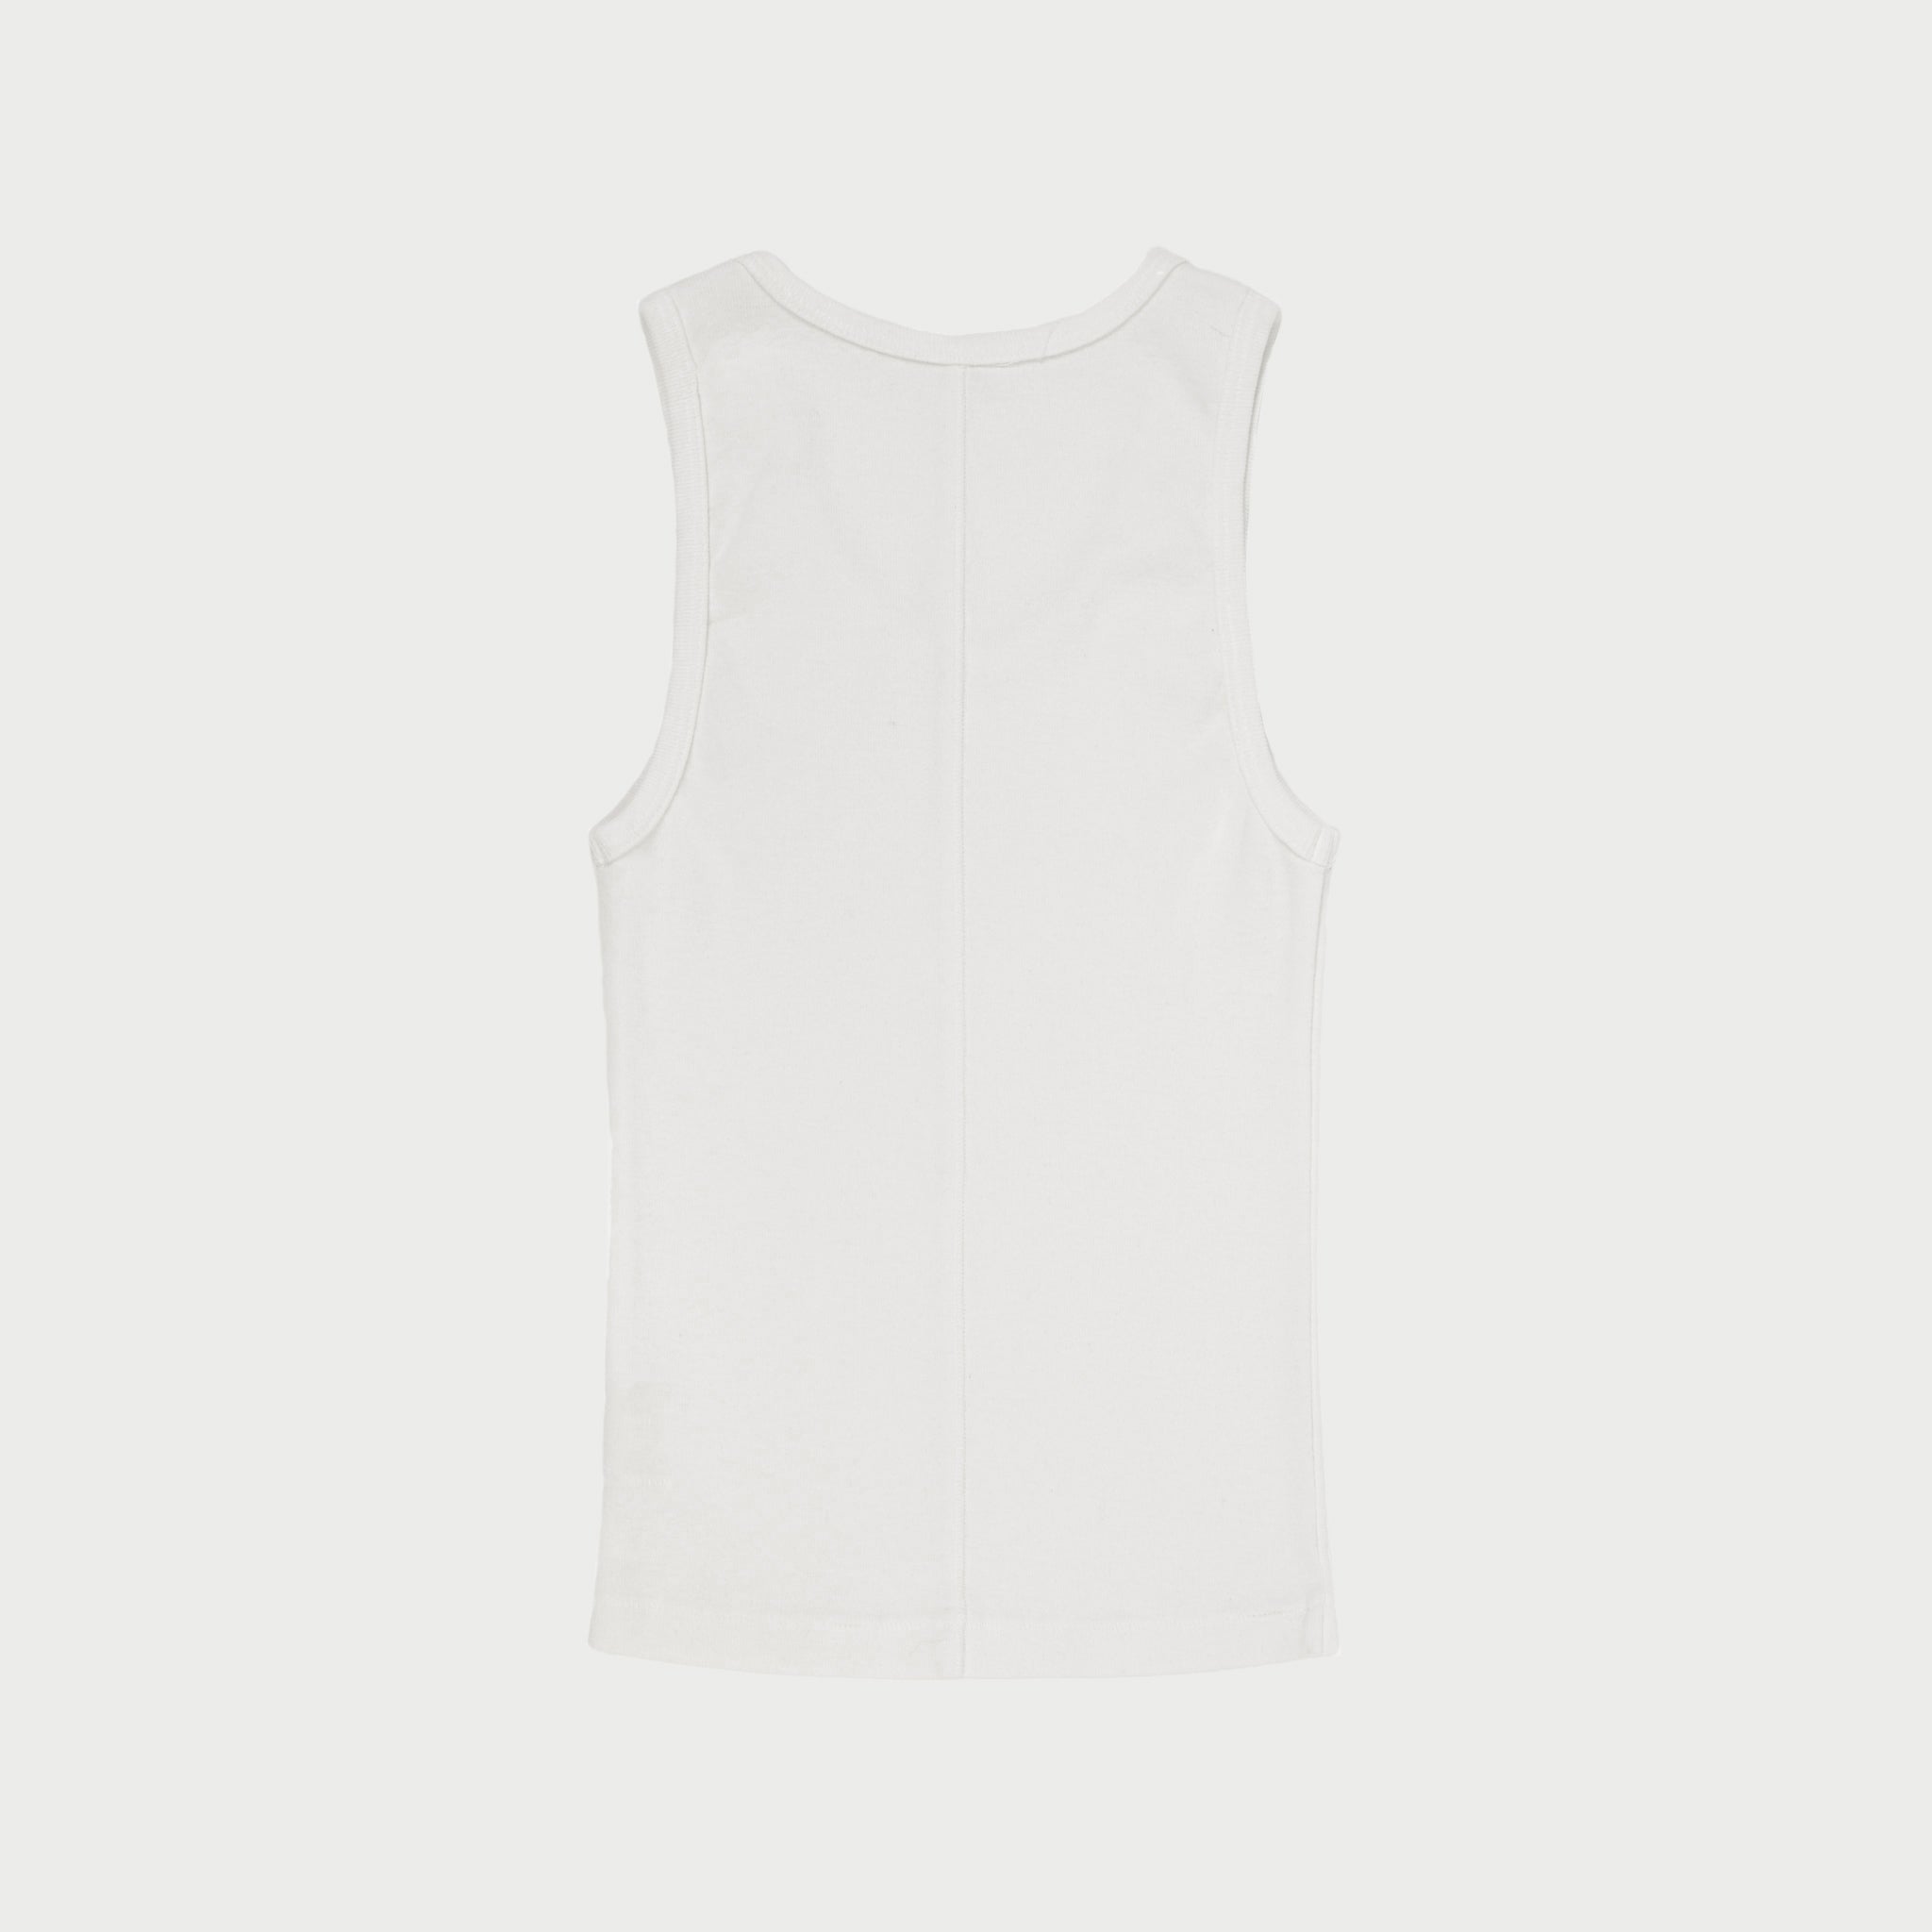 American Classic Tank Top (Vintage White)